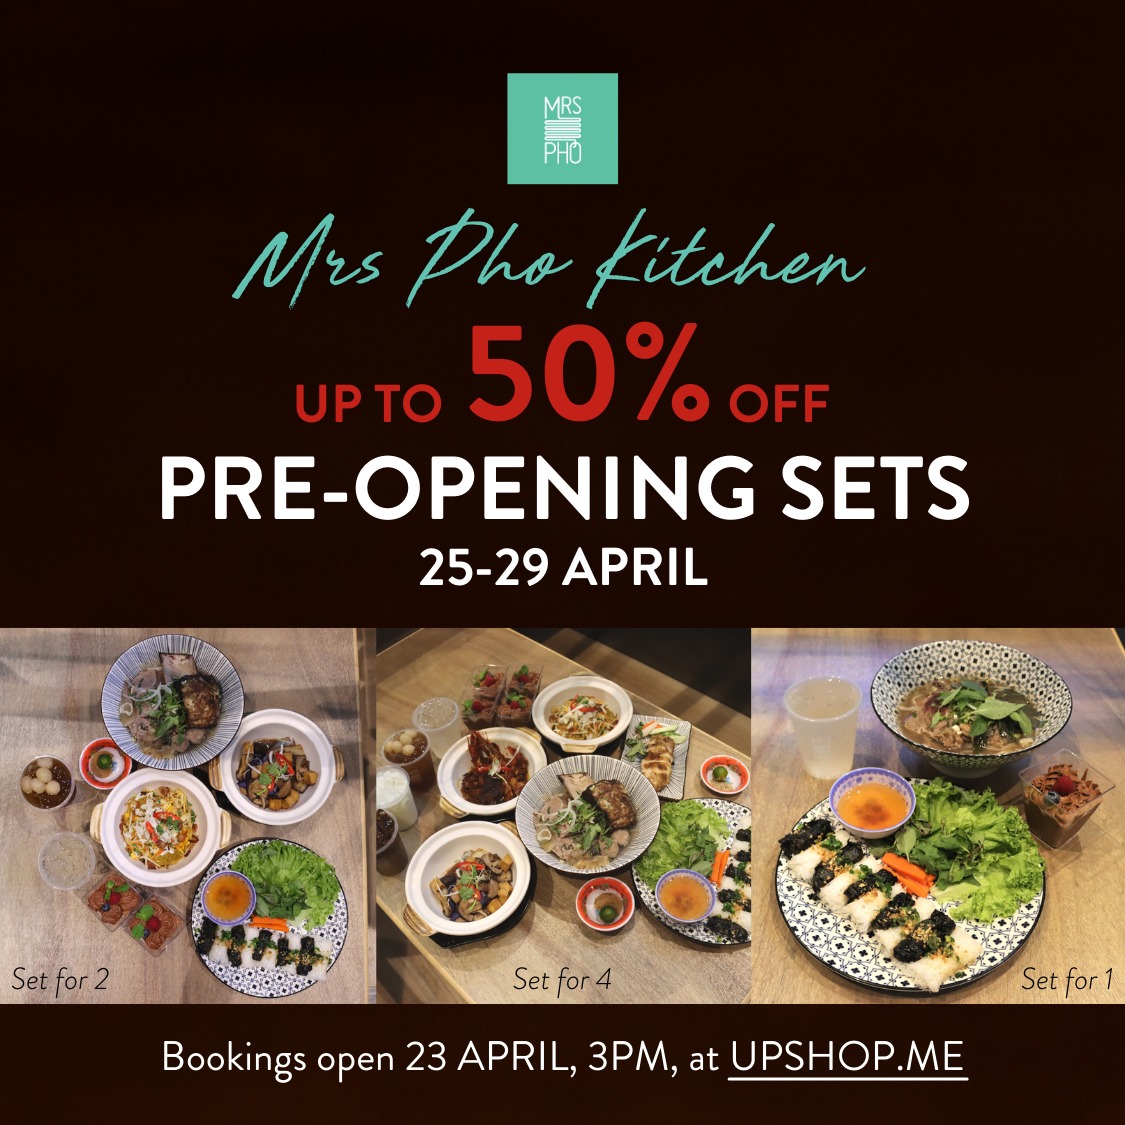 Up to 50% off deals at Tsuta Japanese Dining and Mrs Pho Kitchen when you dine from 25 to 29 April 2021 - 2